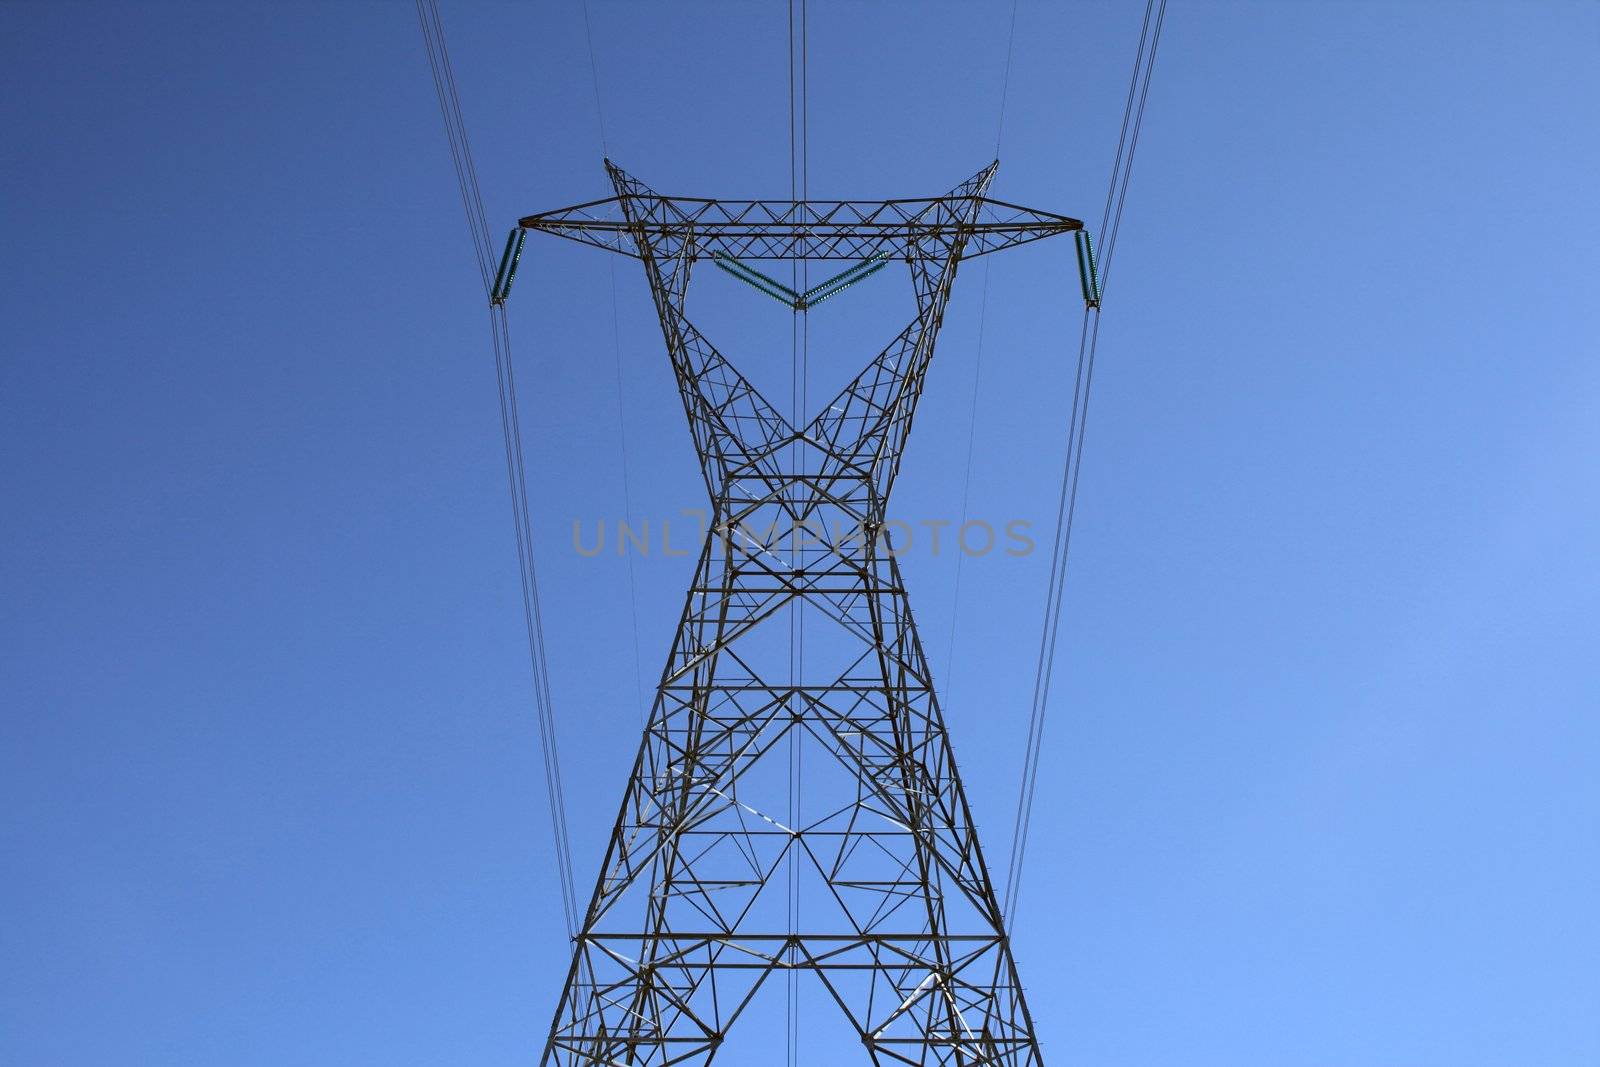 Top of the big electricity pylon by anikasalsera